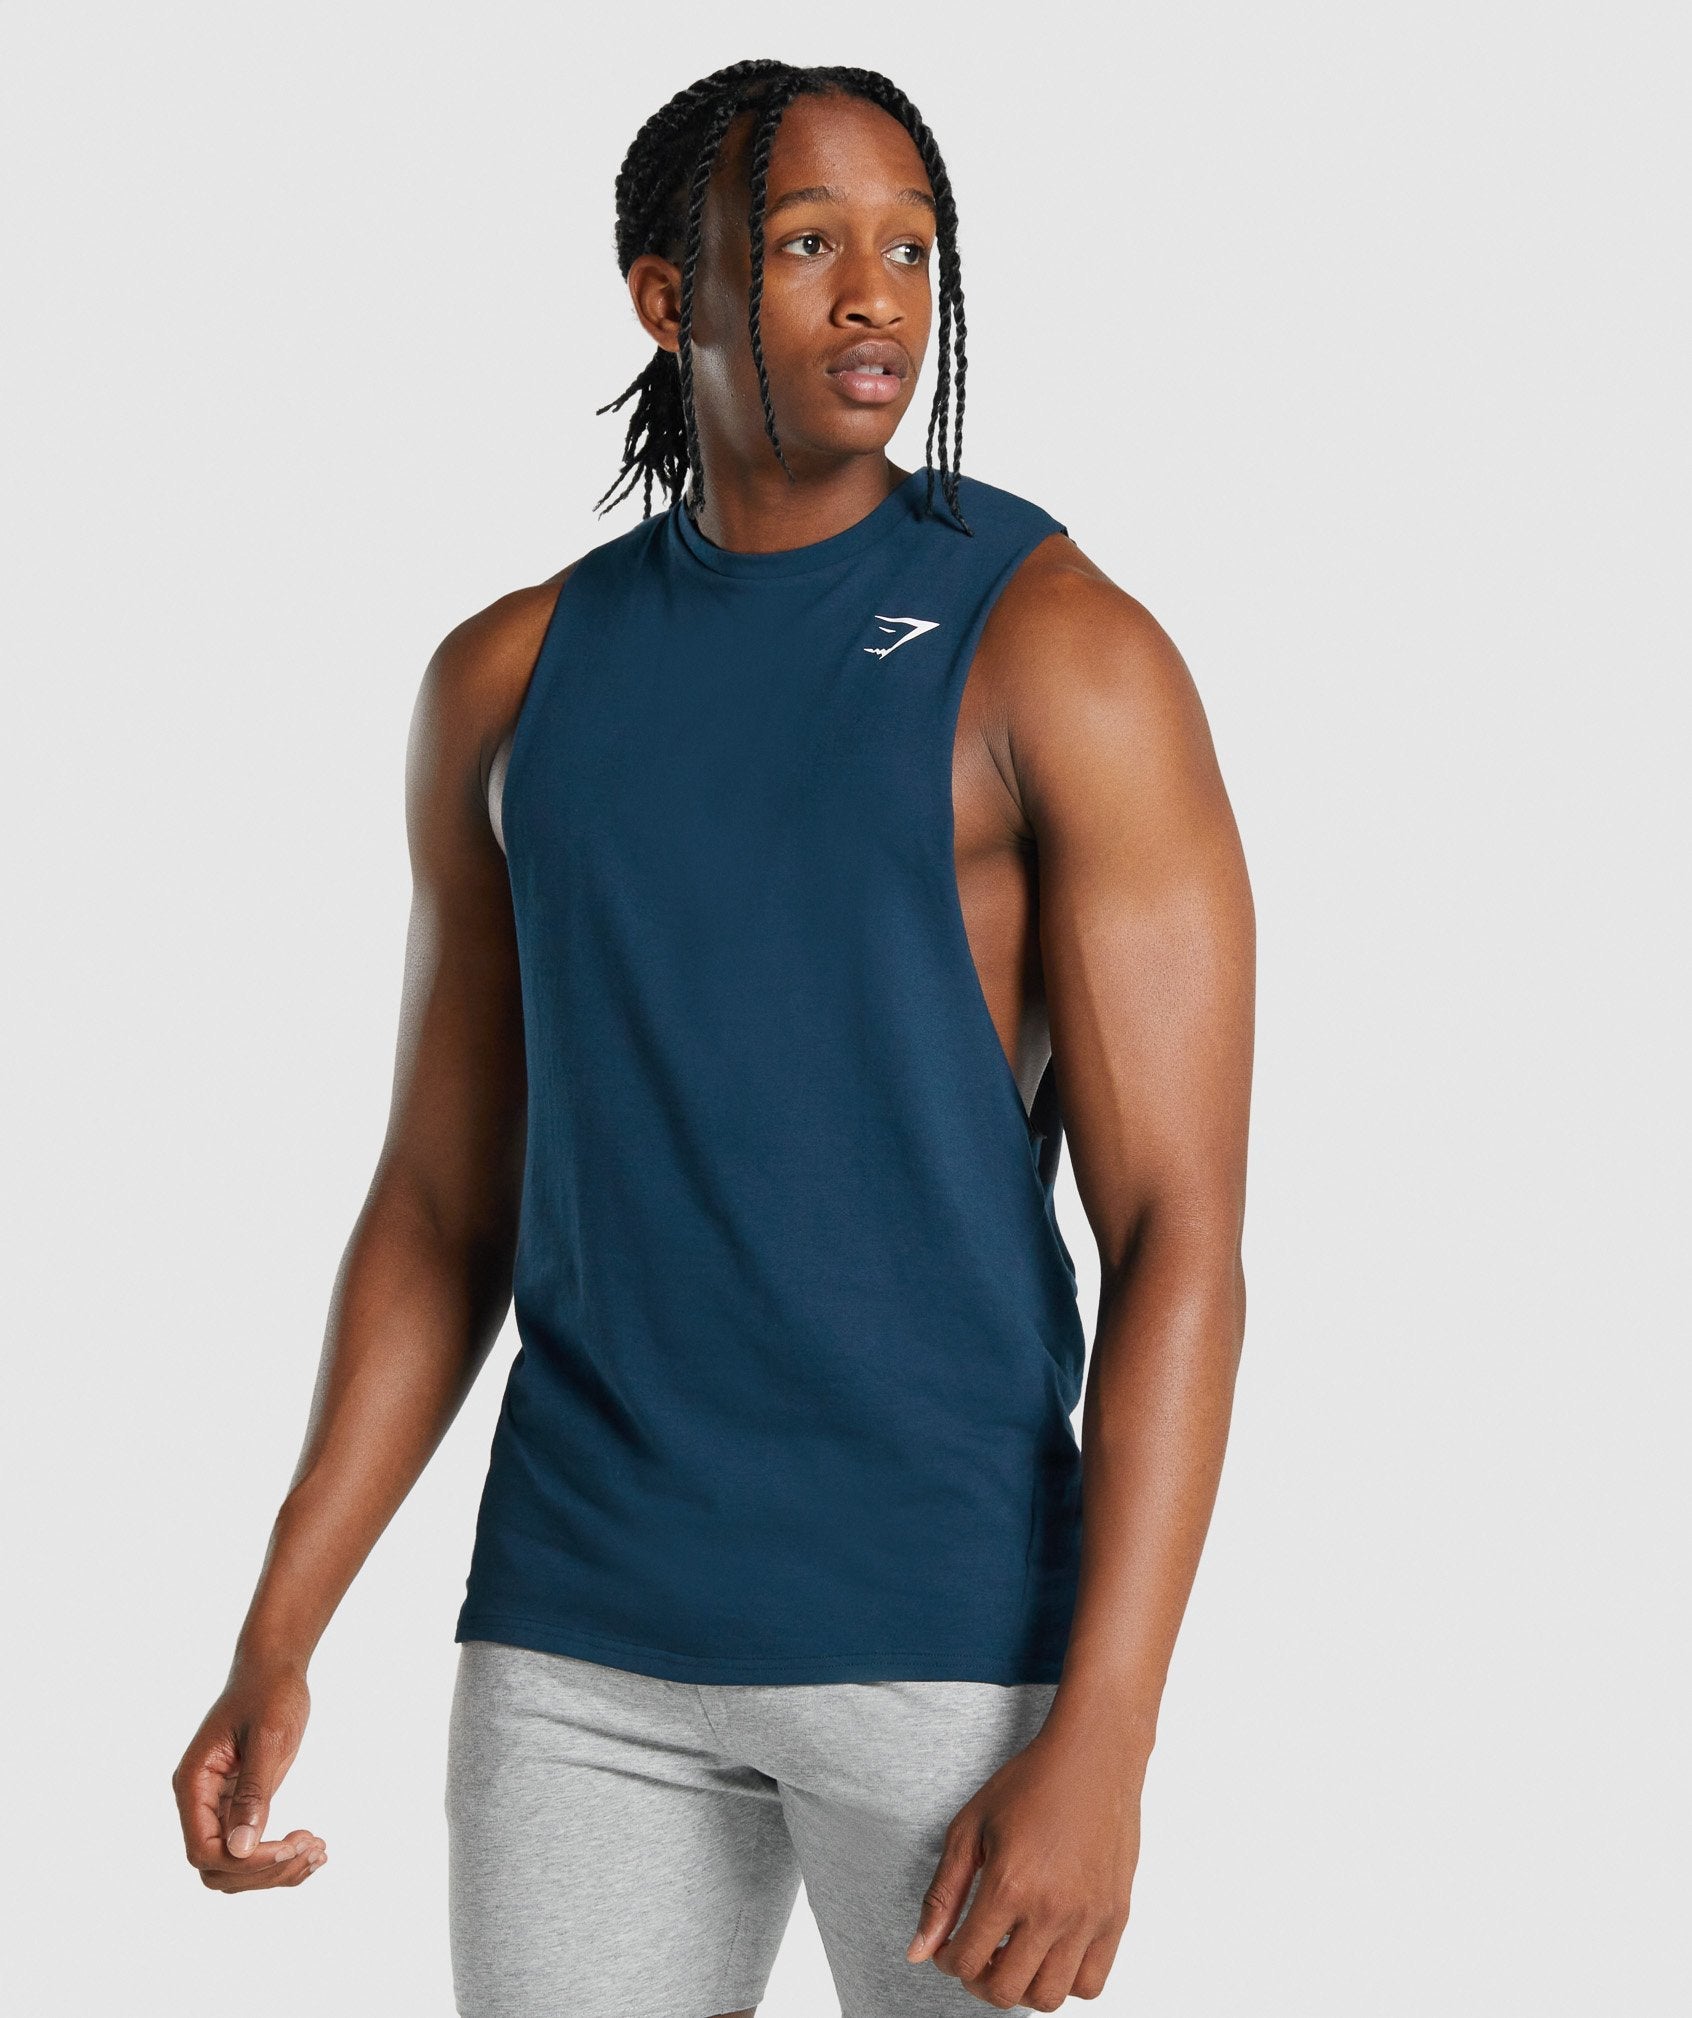 I.FIV5 Drop Armhole Tank Top in Grey for Men